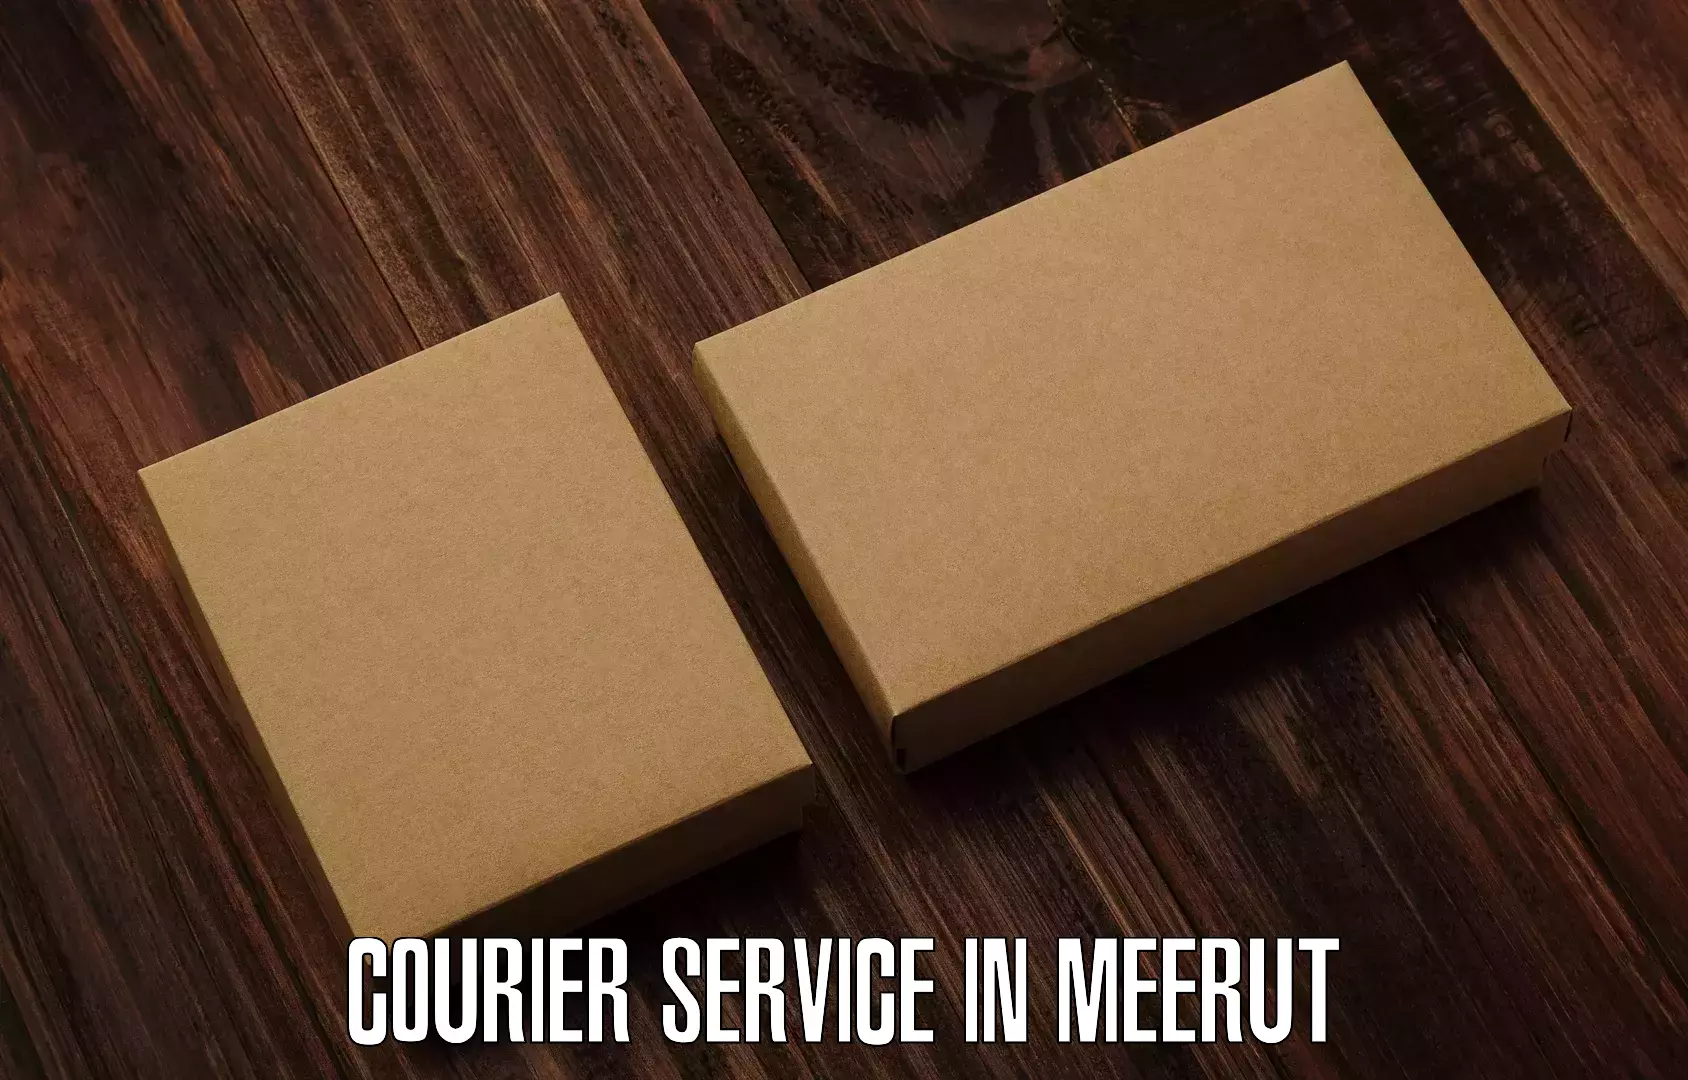 Courier service booking in Meerut